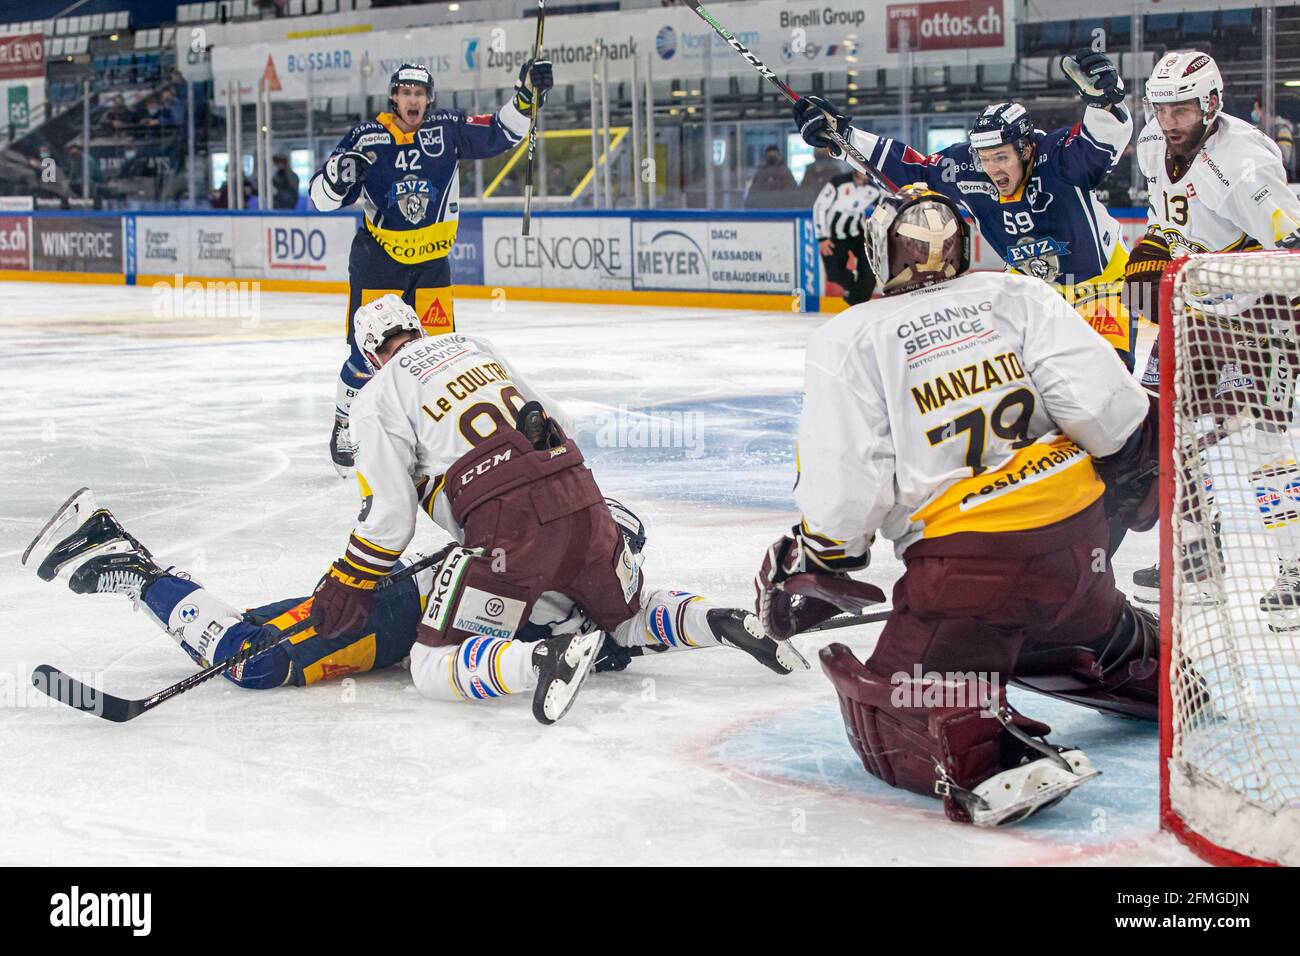 Goalscorer Gregory Hofmann # 15 (EV Zug) is buried after scoring # 90 Simon Le Coultre (Geneva), while Tobias Geisser # 42 (EV Zug) and Justin Abdelkader # 89 (EV Zug) are already cheering during the National League Playoff Final Ice hockey game 3 between EV Zug and Geneve-Servette HC on May 7th, 2021 in the Bossard Arena in Zug. (Switzerland/Croatia OUT) Credit: SPP Sport Press Photo. /Alamy Live News Stock Photo